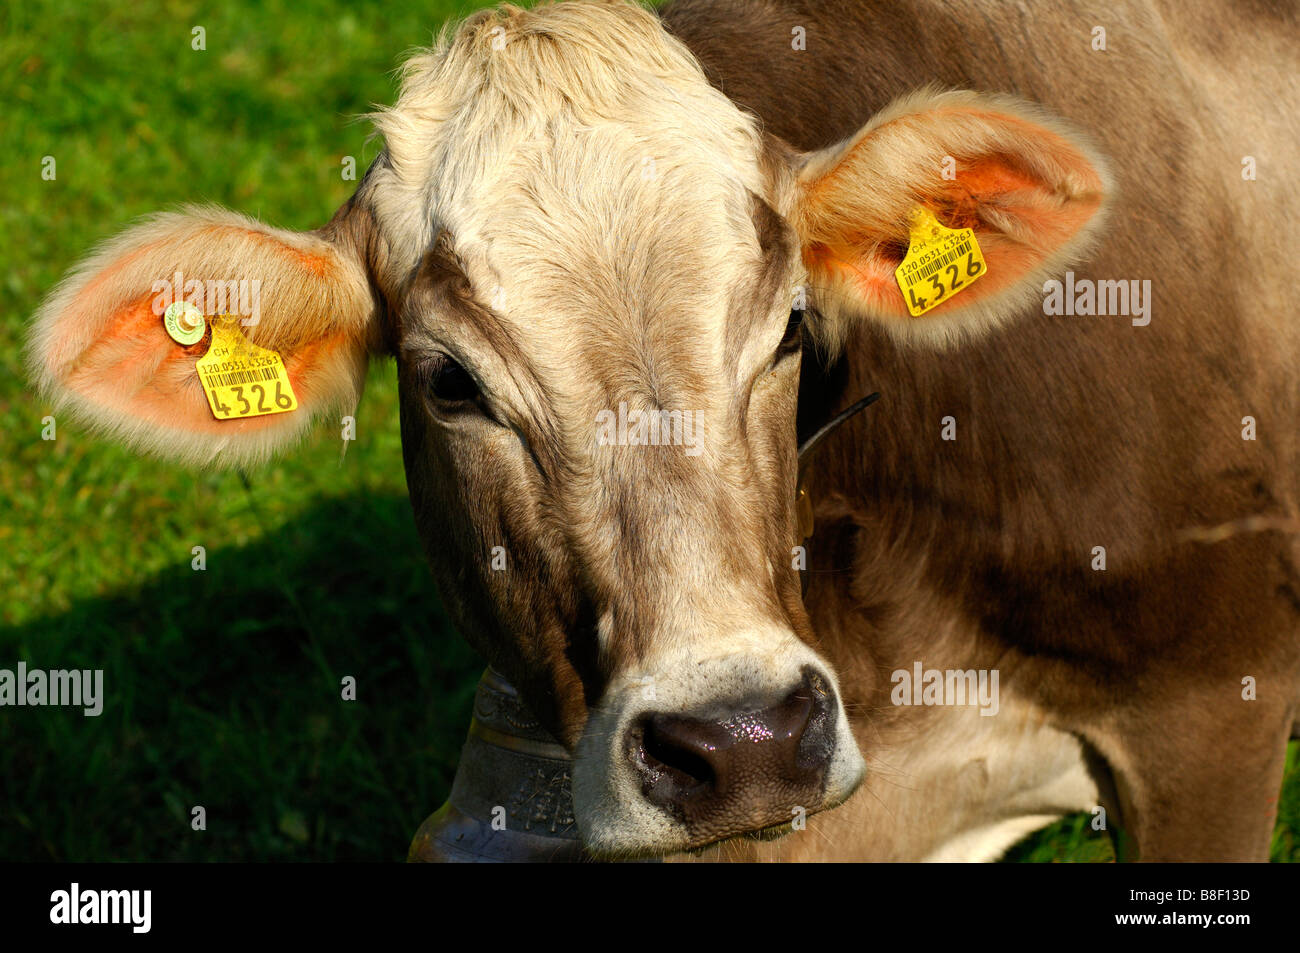 Hornless Swiss Brown cattle with an ear tag and a cow bell around the neck looking into the camera Canton of Vaud Switzerland Stock Photo